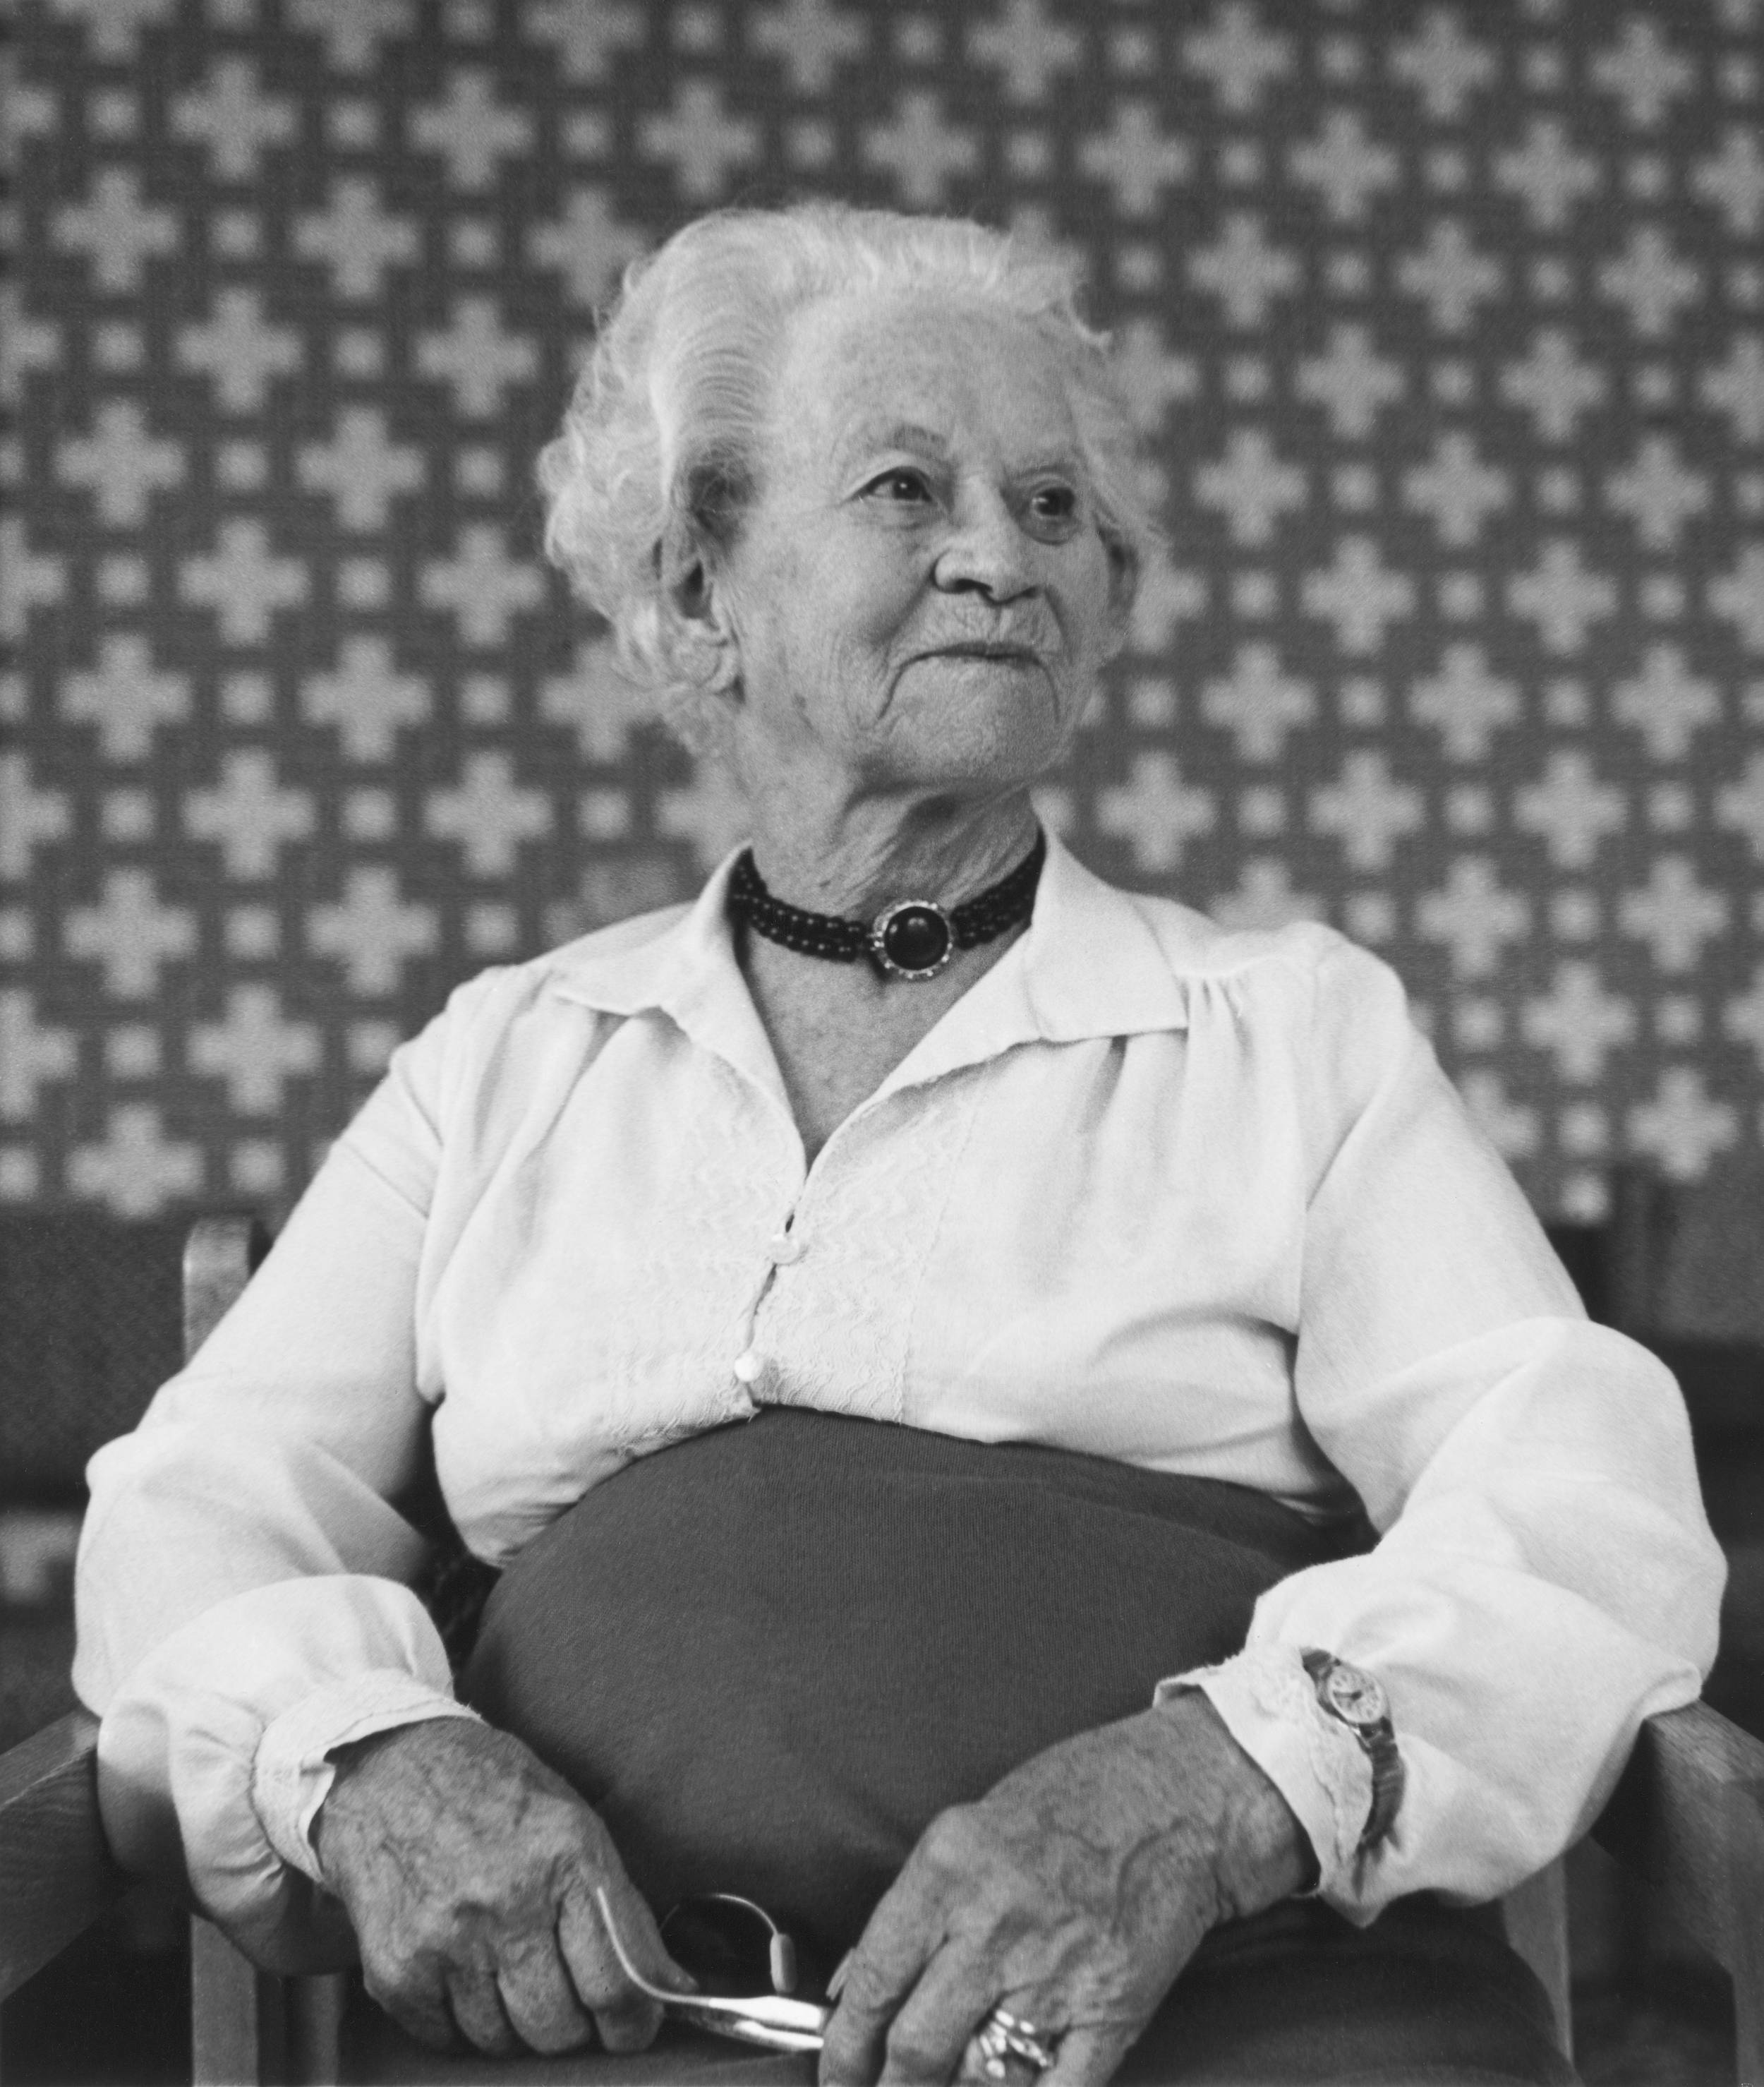 Black and white photo of elderly woman seated with wrist watch on outside of white blouse, looking off to the side very proud and distinguished.